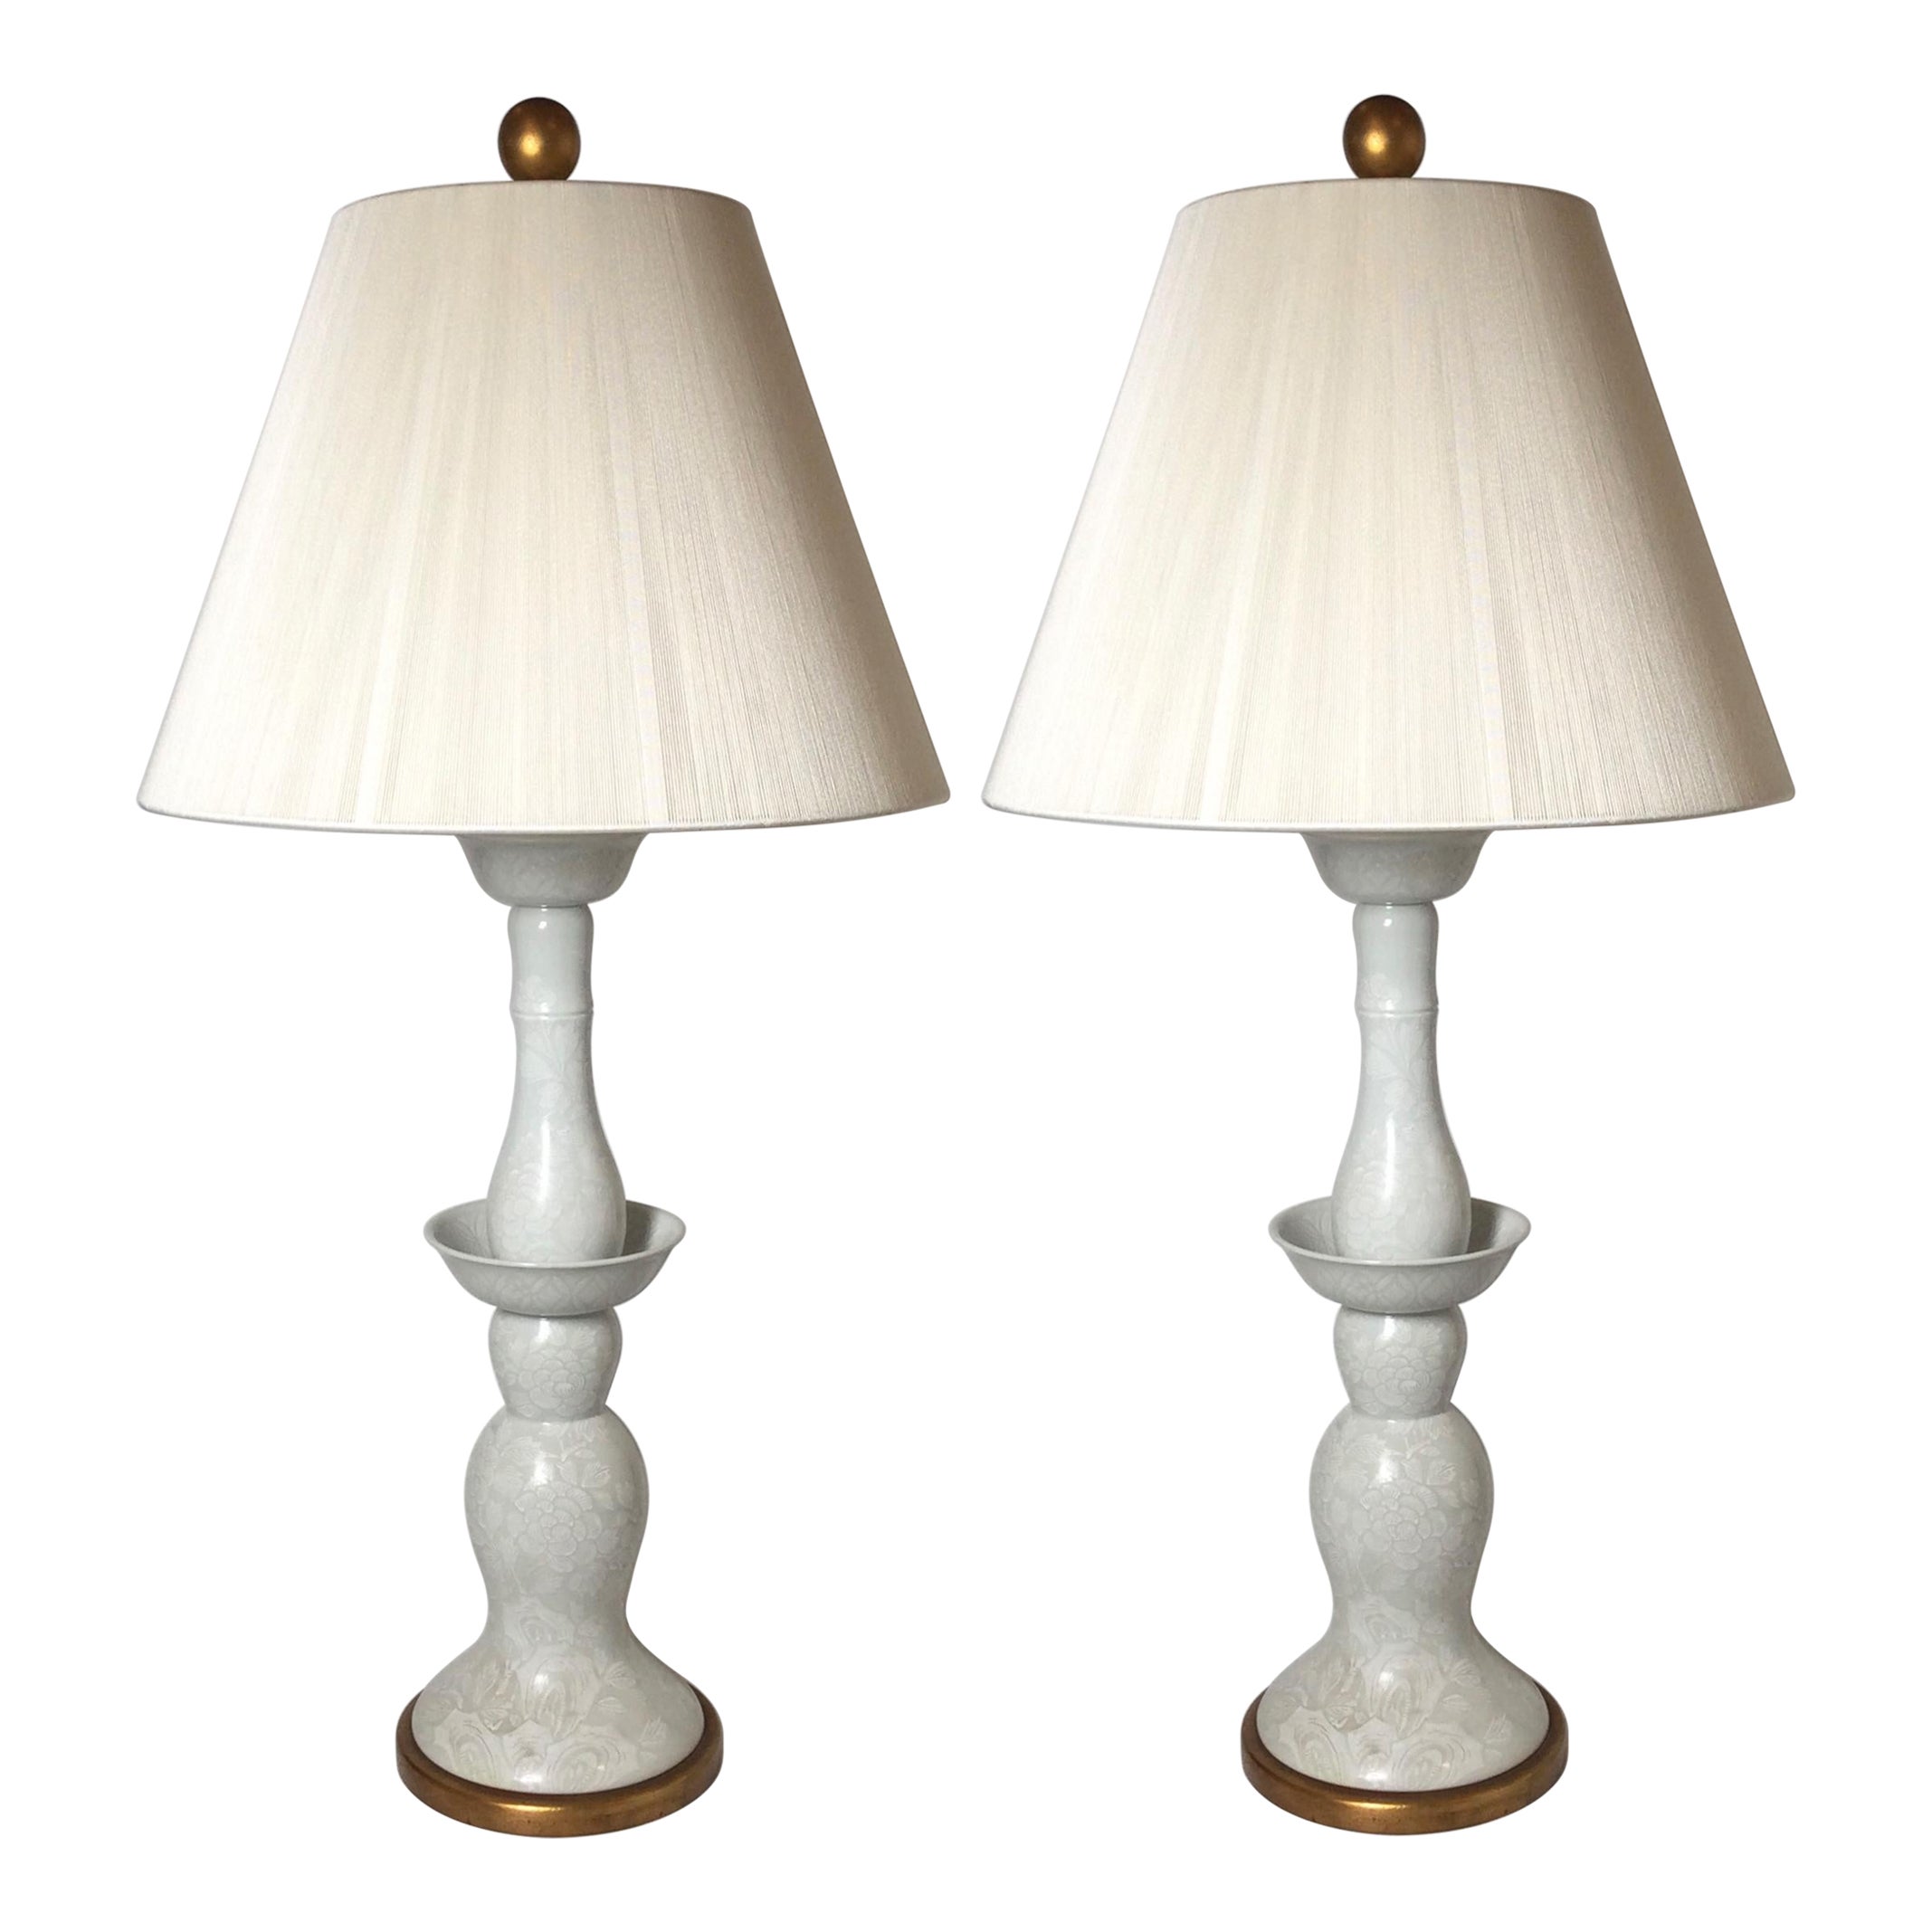 Pair of Mid-Century Modern Tall Porcelain Lamps For Sale